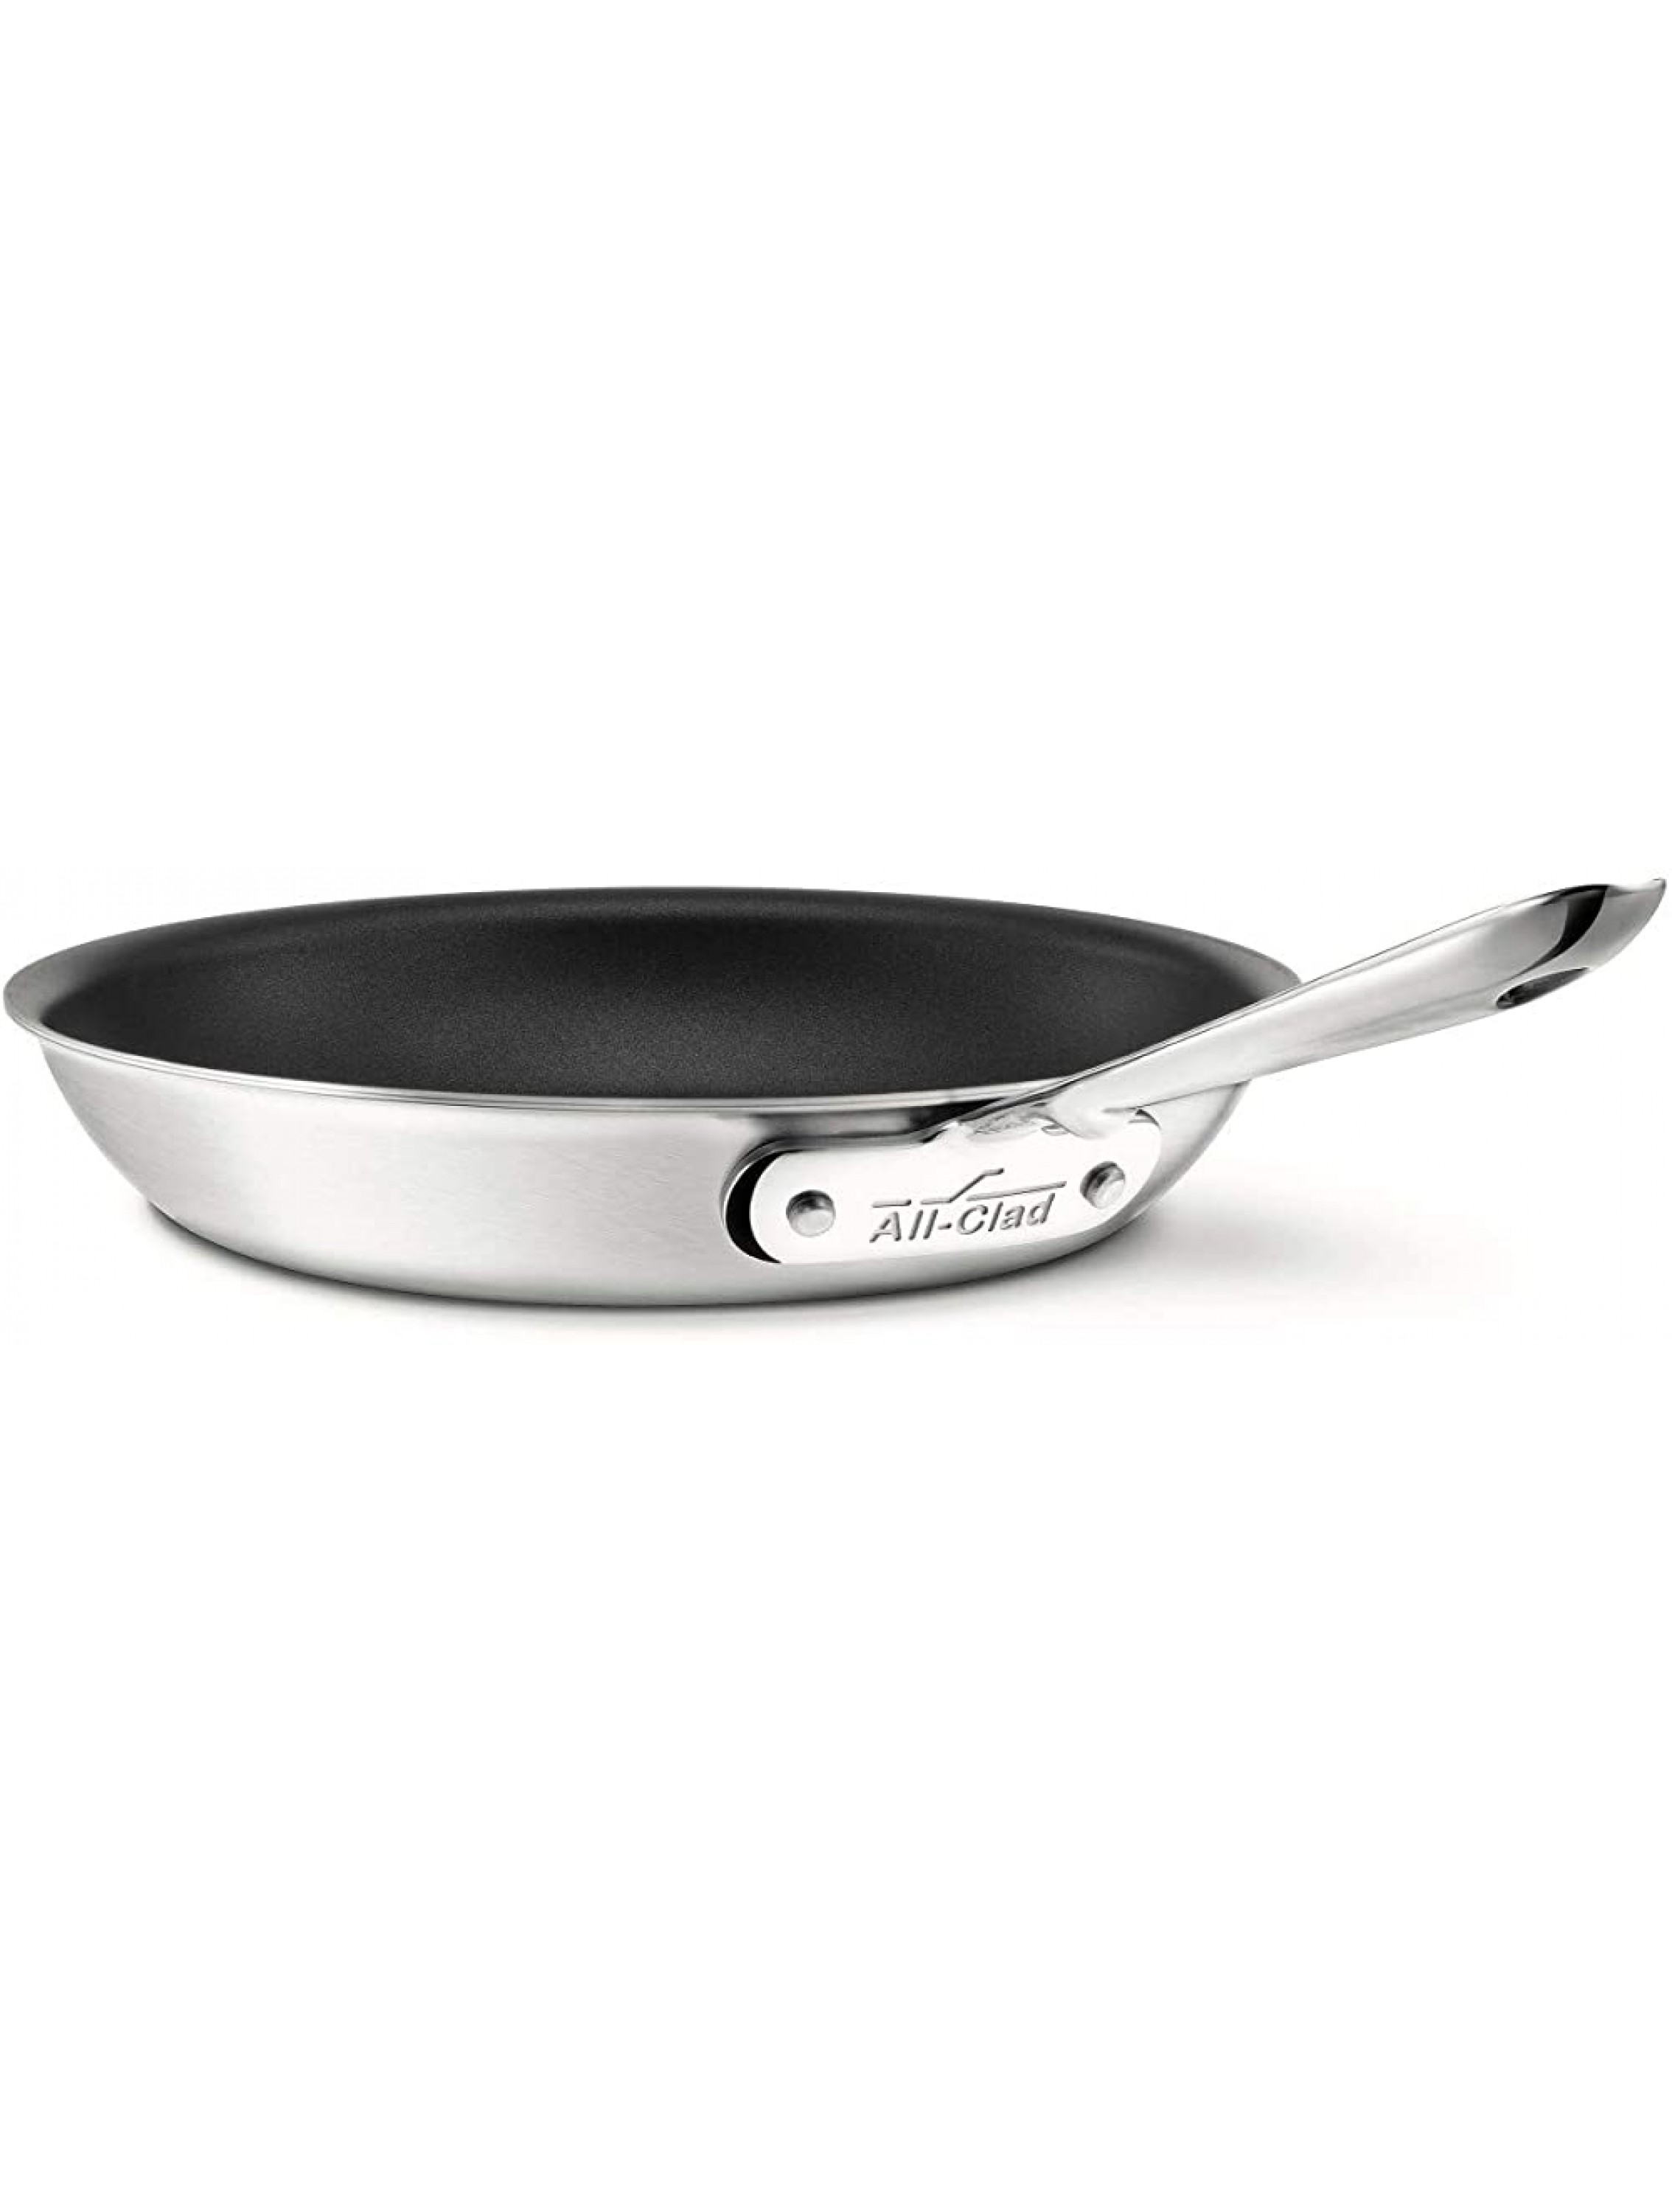 All-Clad BD55110NSR2 D5 Brushed 18 10 Stainless Steel 5-Ply Bonded Dishwasher Safe Nonstick Fry Pan Saute Pan Cookware 10-Inch Silver - BODNLHUJ8